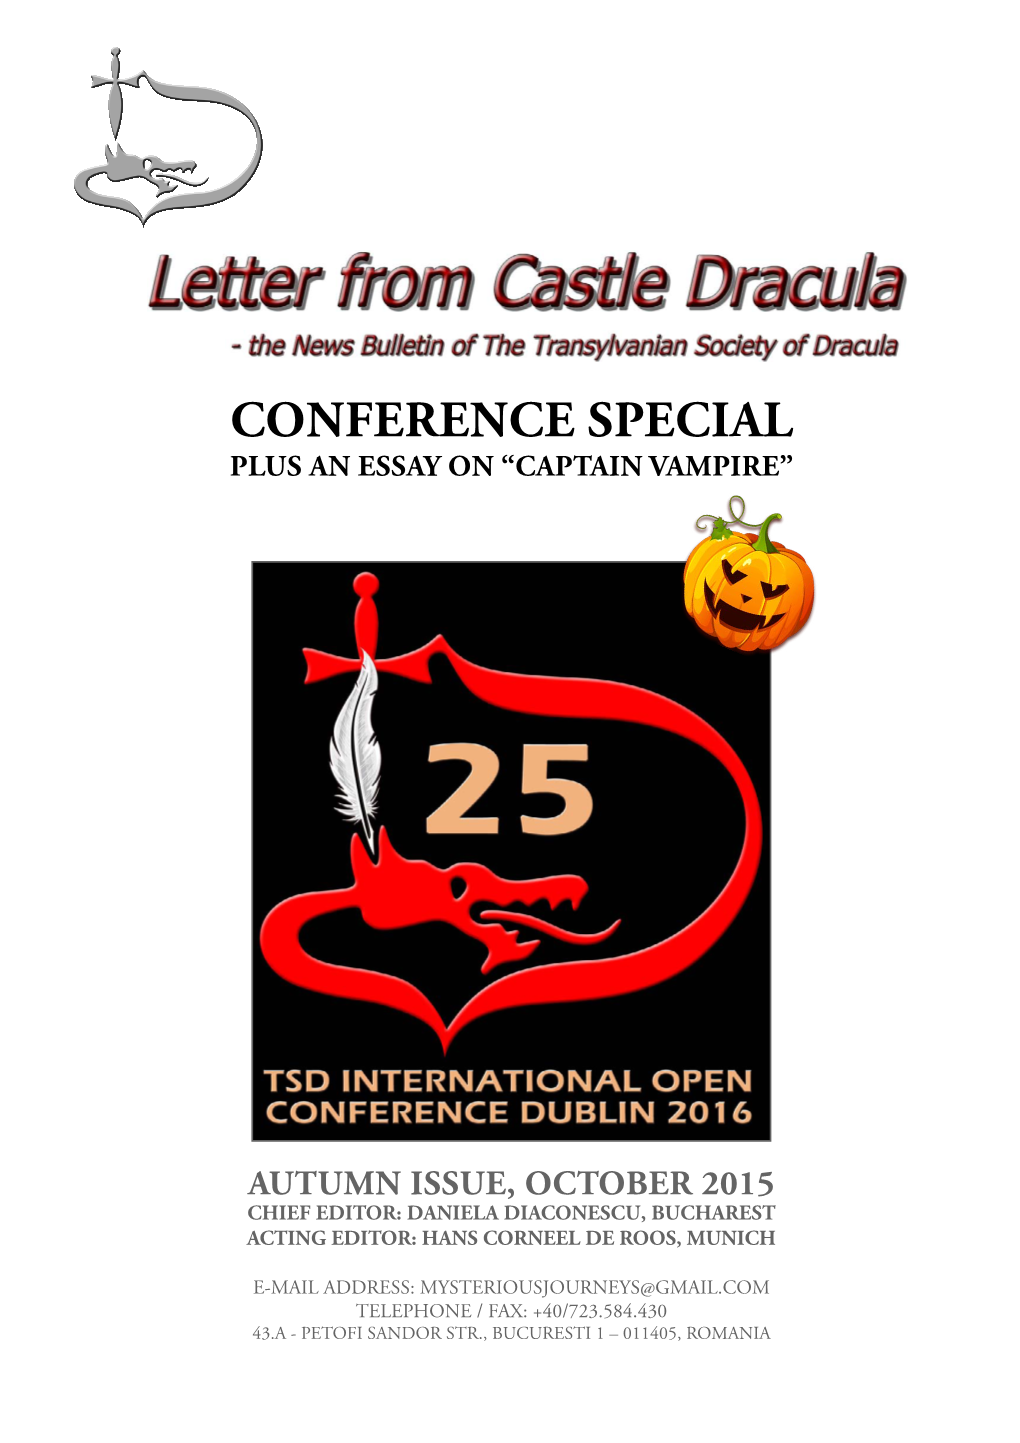 Conference Special Plus an Essay on “Captain Vampire”